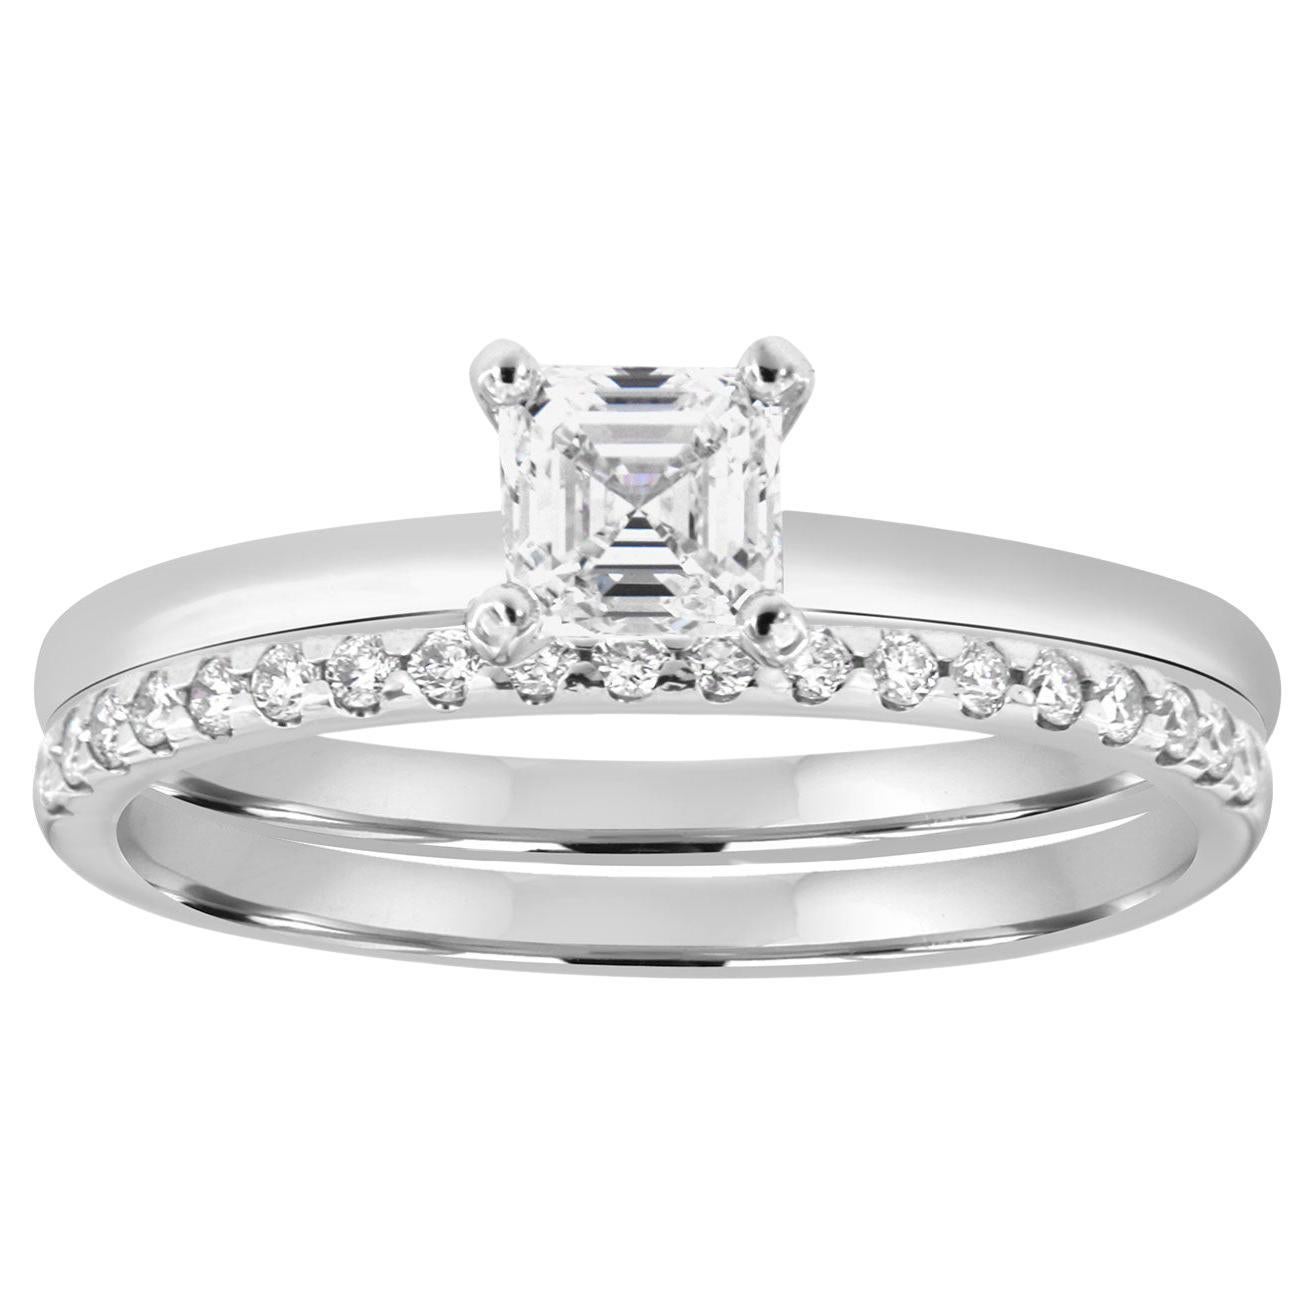 14K White Gold GIA Certified 0.60 Asscher Cut Diamond Ring Set For Sale